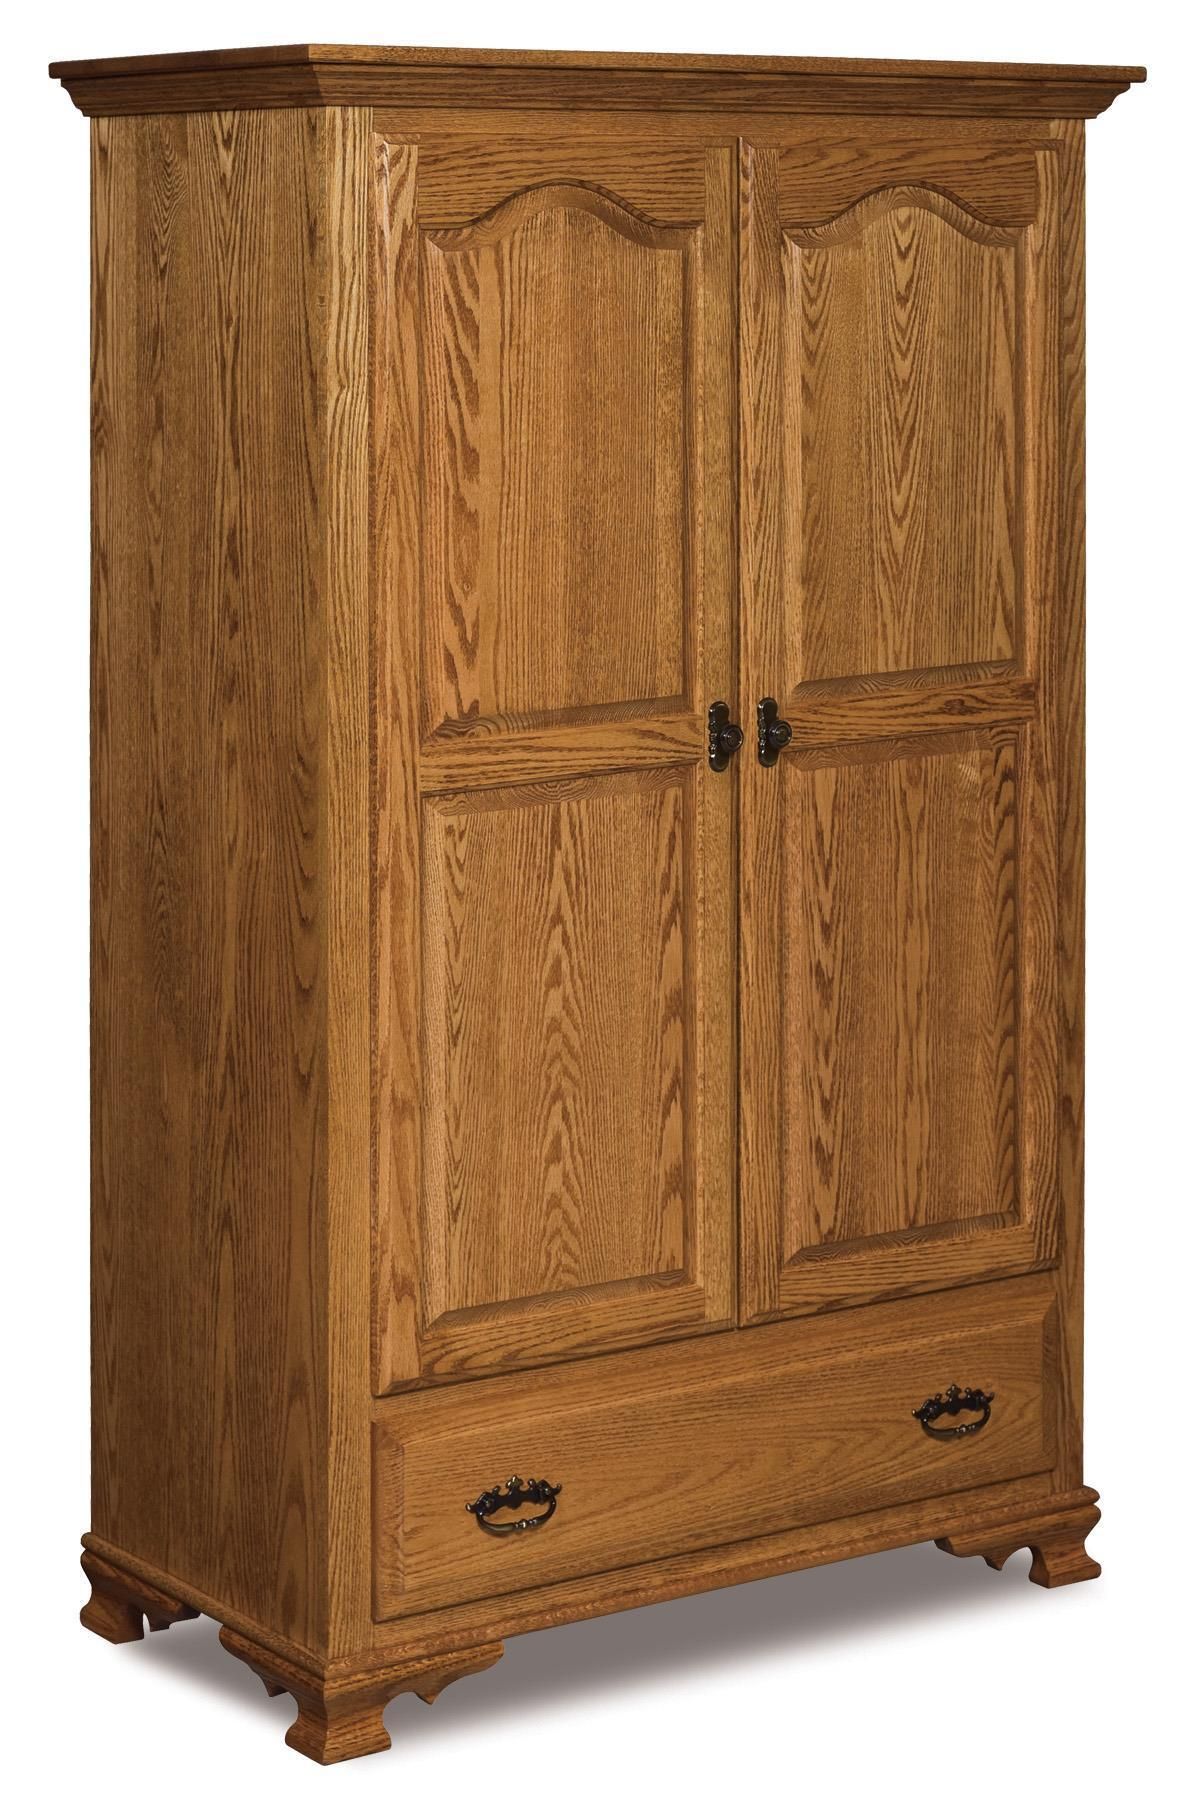 Heritage Wilma Wardrobe Armoire From Dutchcrafters Amish Furniture Throughout Old Fashioned Wardrobes (View 9 of 15)